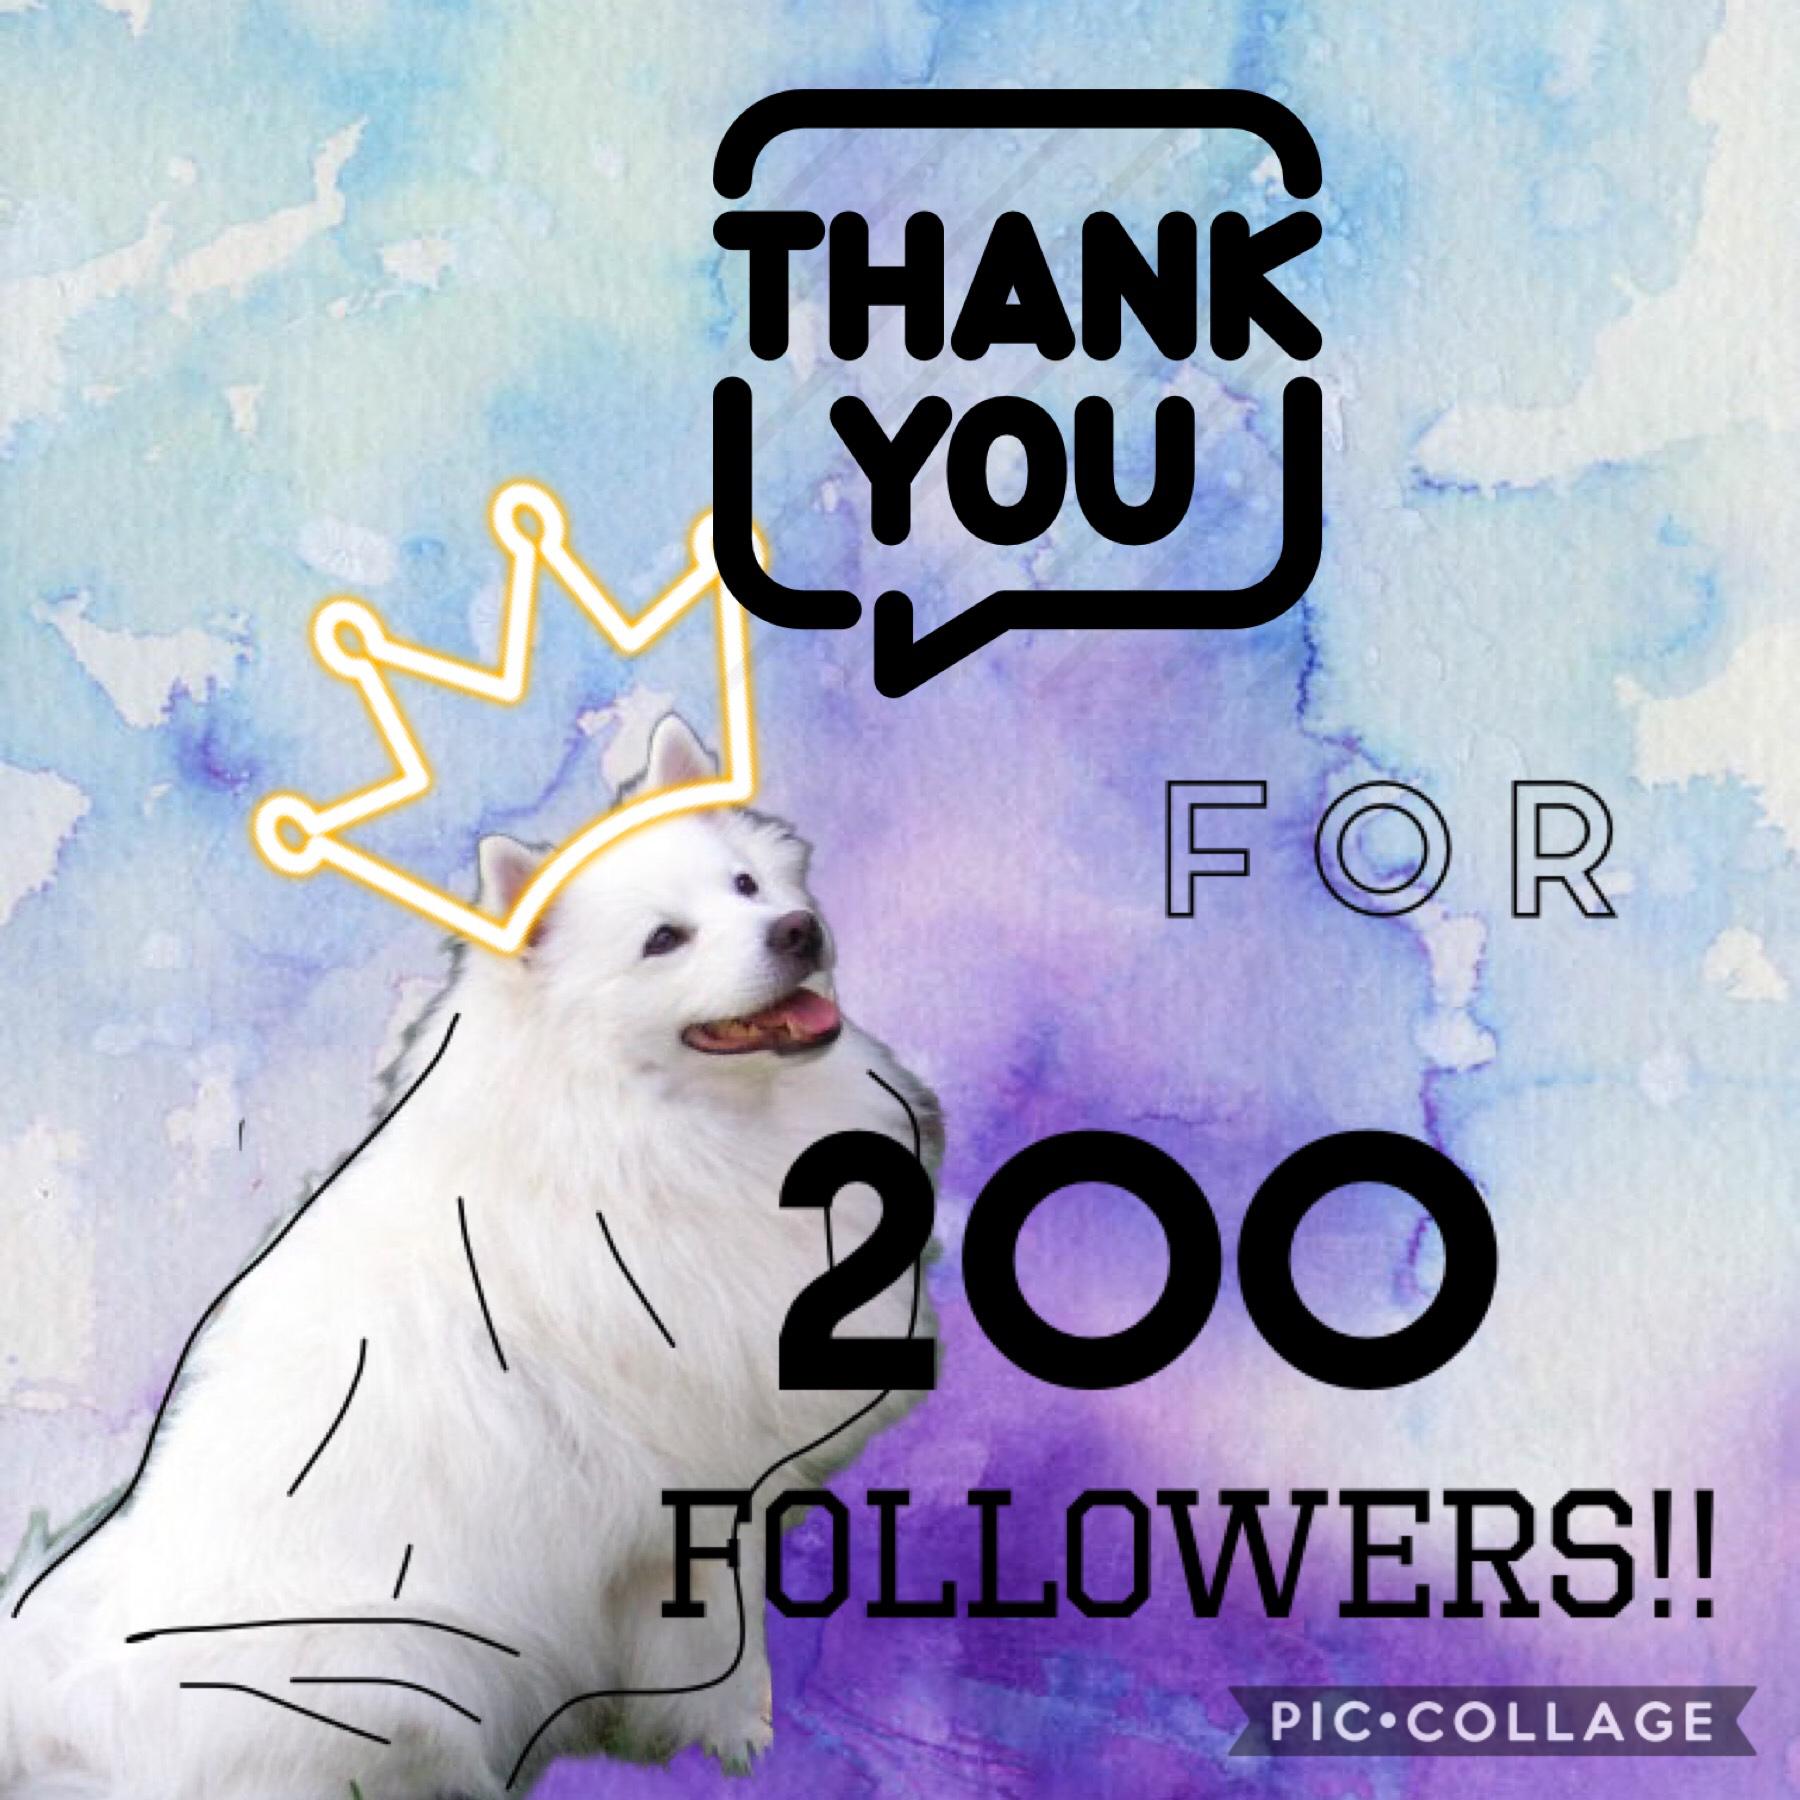 Thank you all so much!!